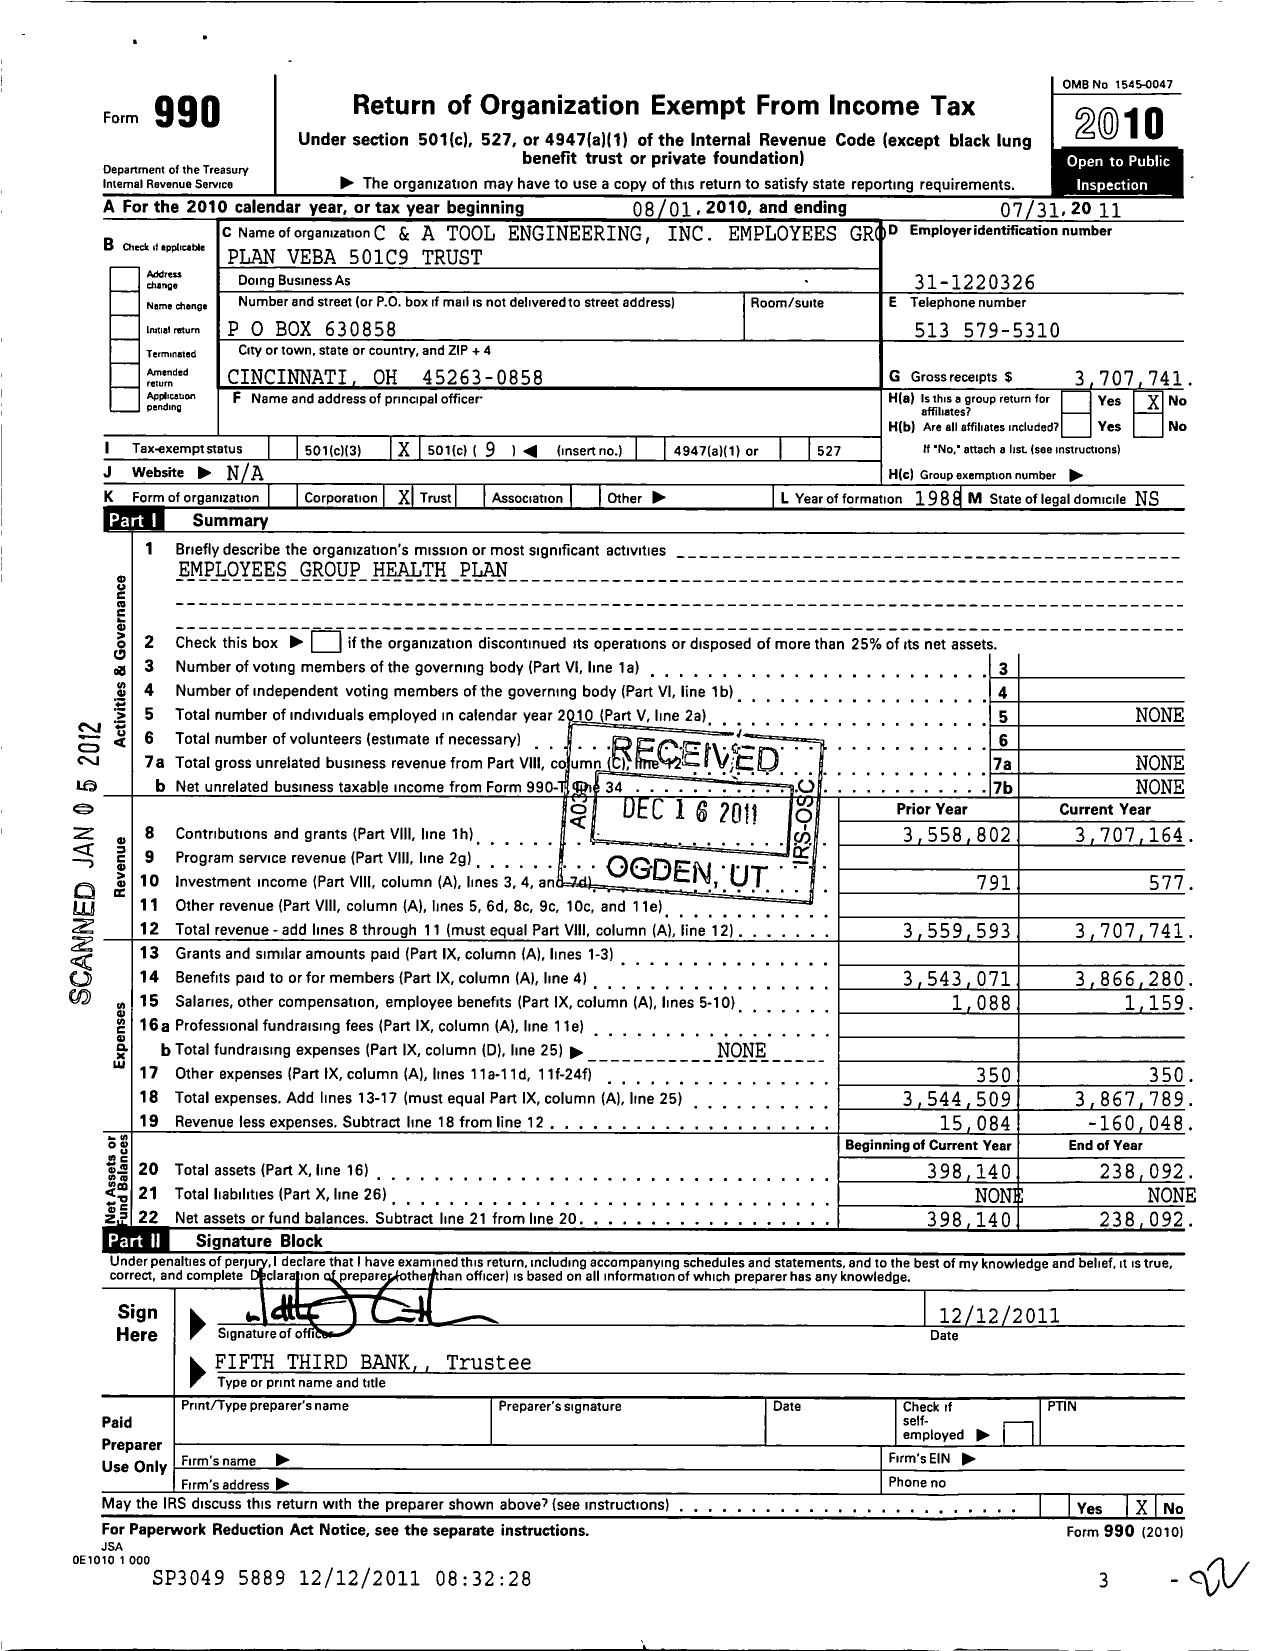 Image of first page of 2010 Form 990O for C and A Tool Engineering Employees Group Plan 501 C 9 Trust